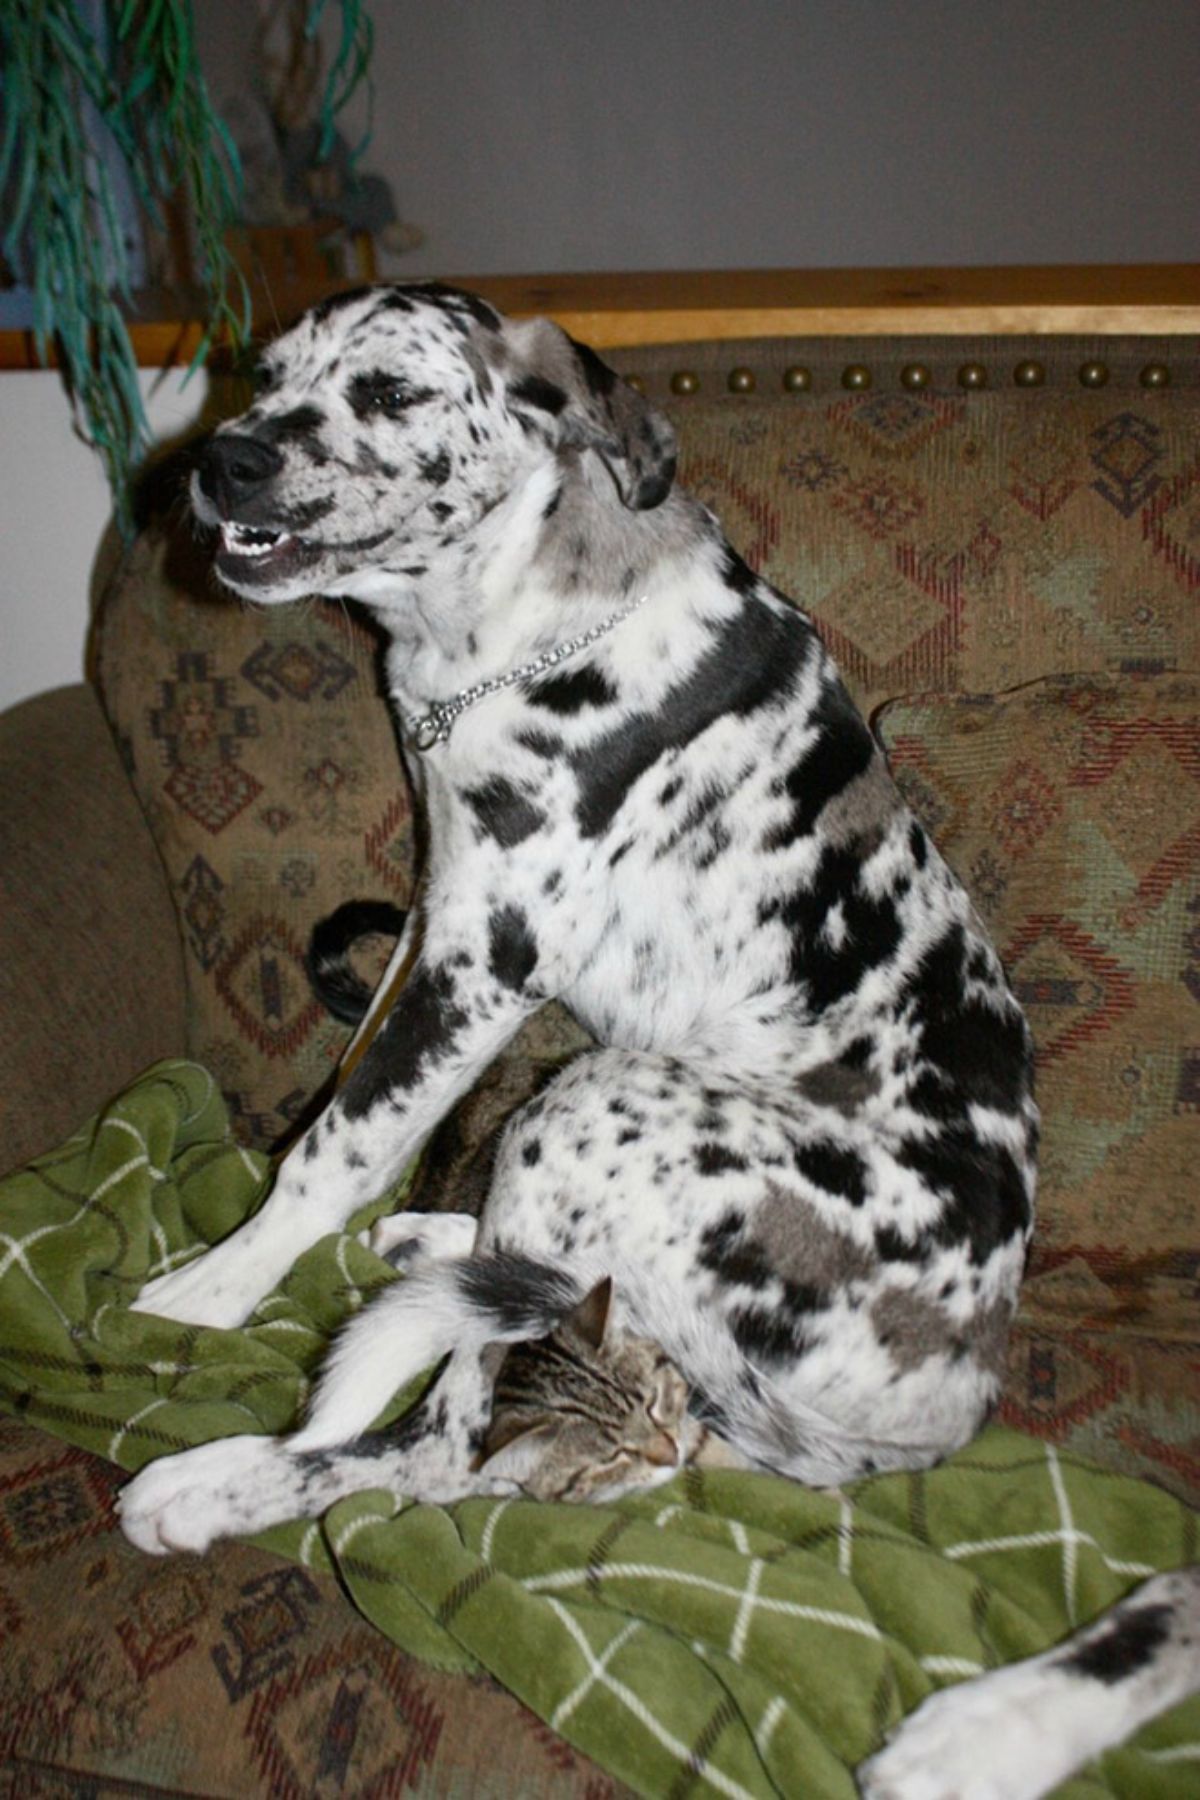 black and white dog sitting on a grey tabby cat